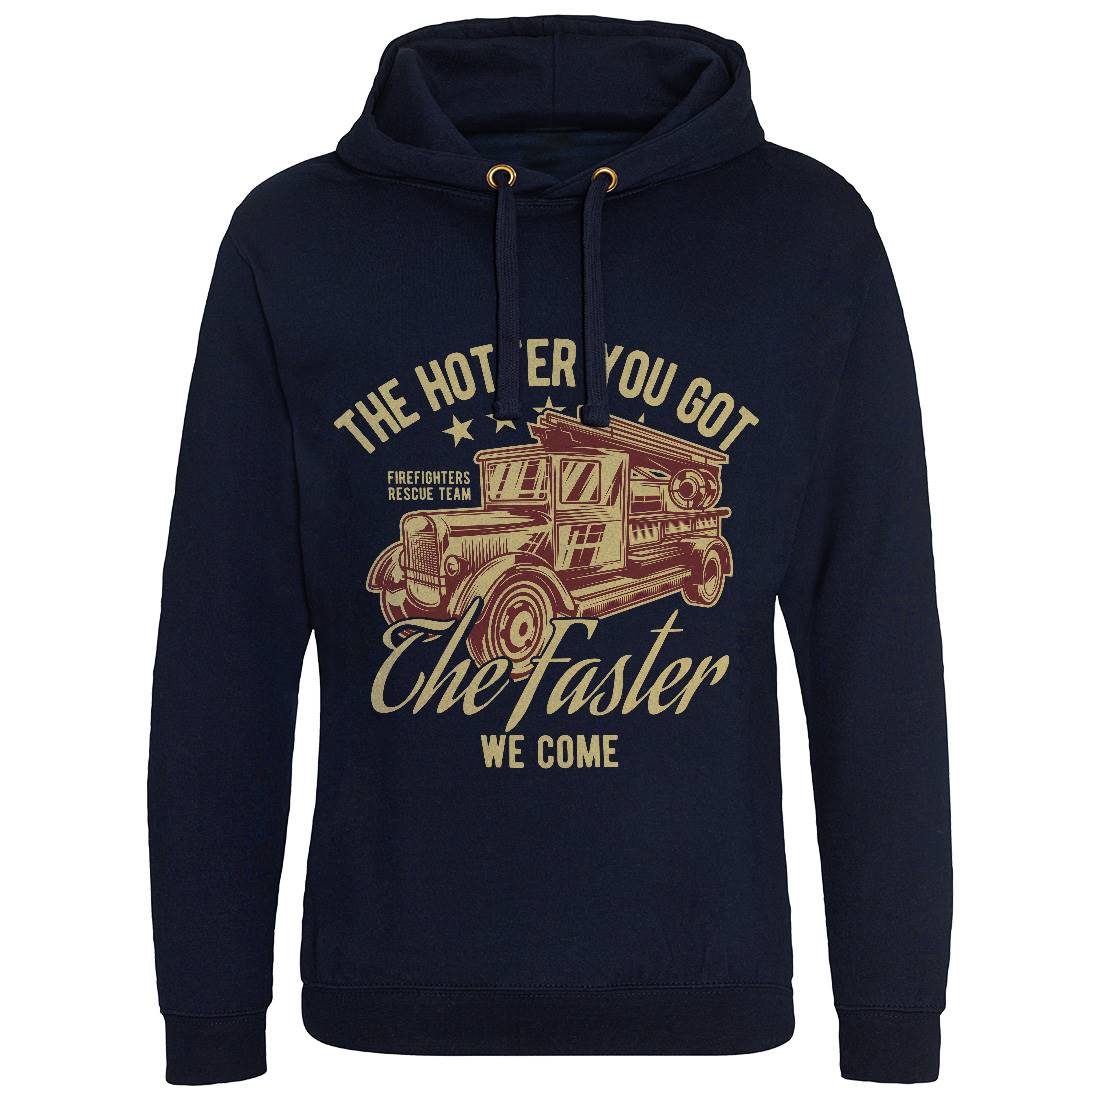 Fire Fighter Mens Hoodie Without Pocket Firefighters B815